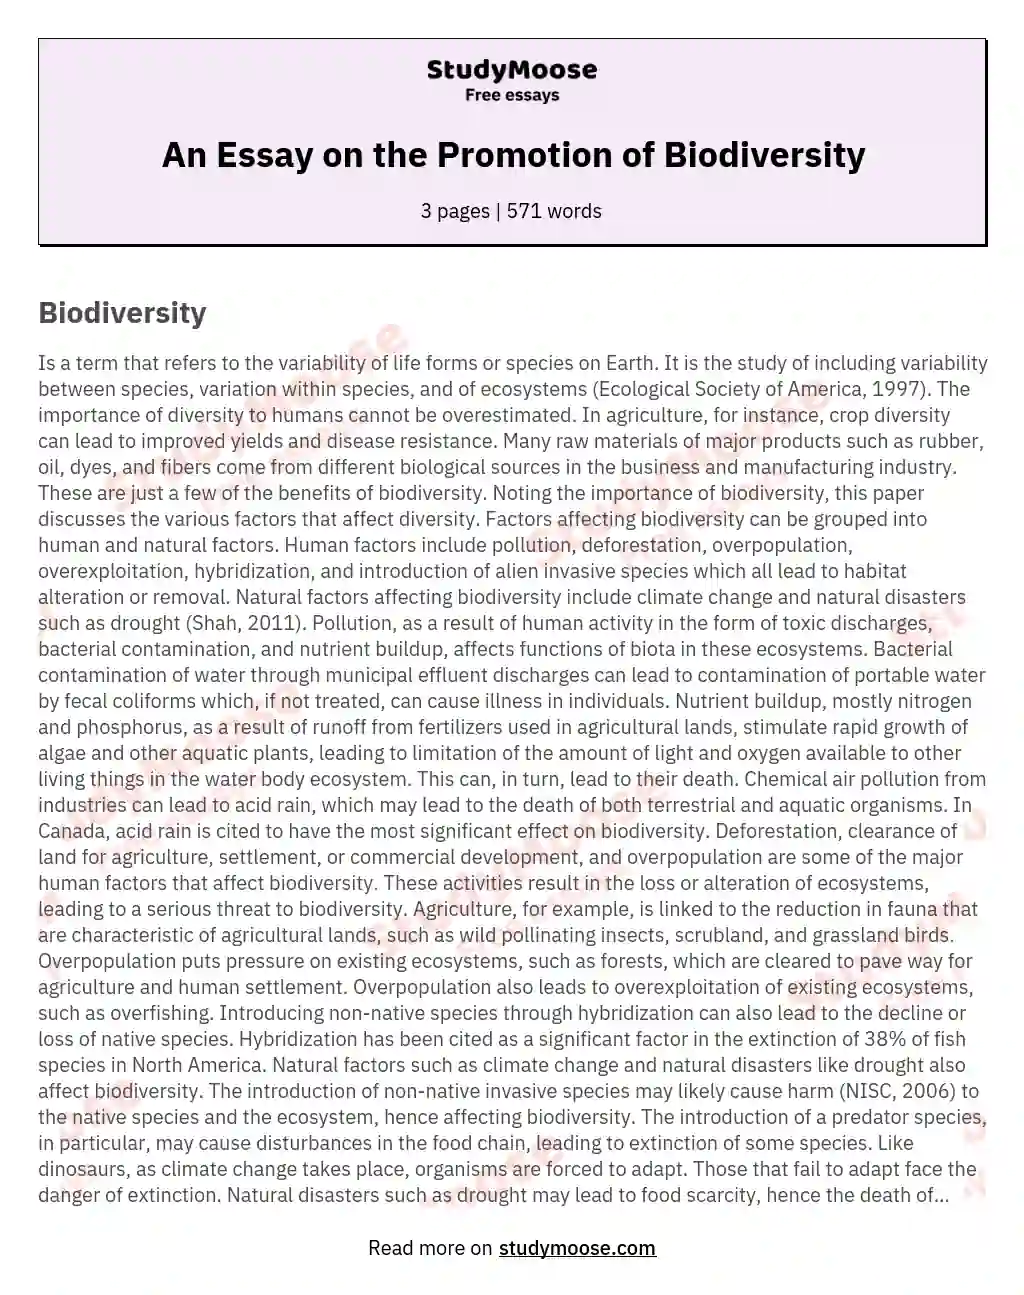 An Essay on the Promotion of Biodiversity essay